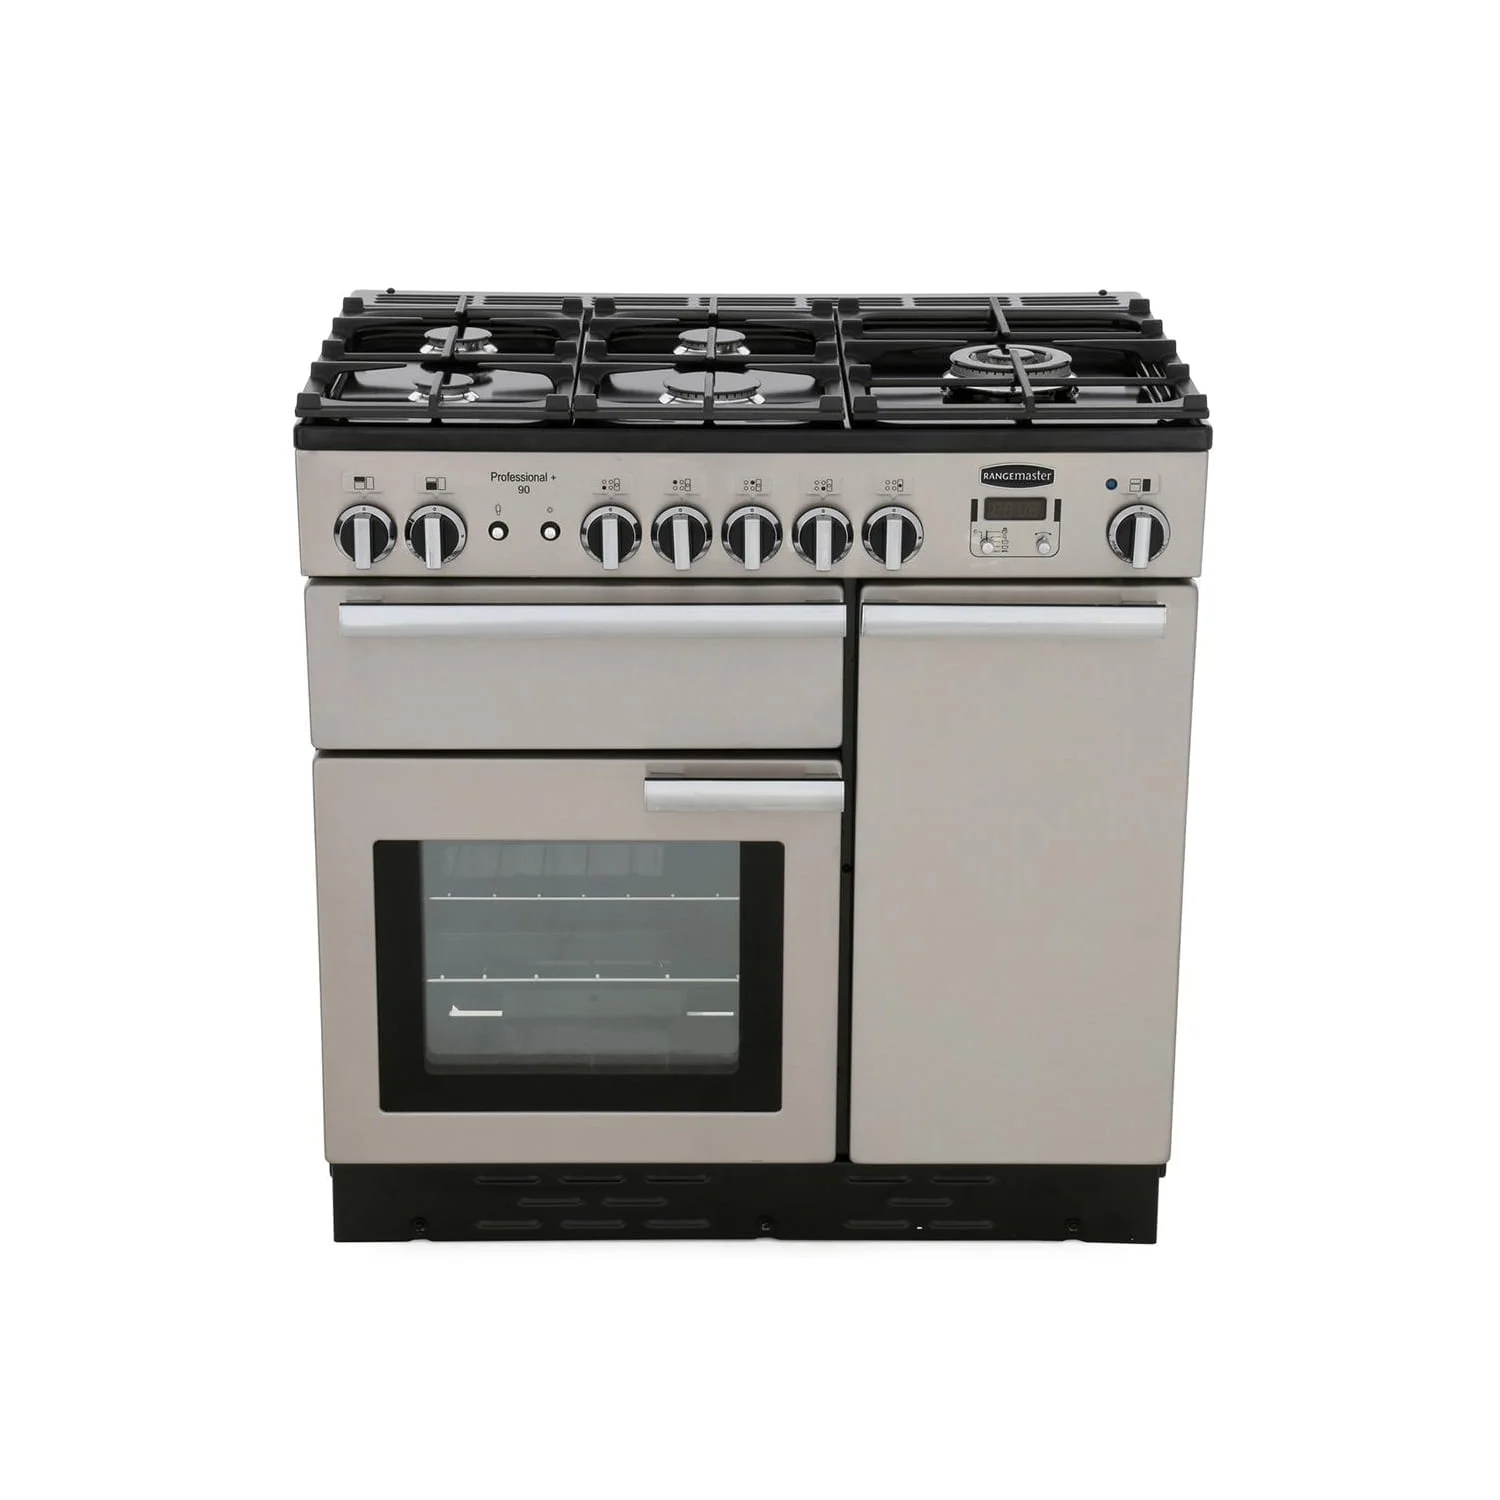 Rangemaster PROP90NGFSS/C Professional Plus Stainless Steel with Chrome Trim 90cm Gas Range Cooker